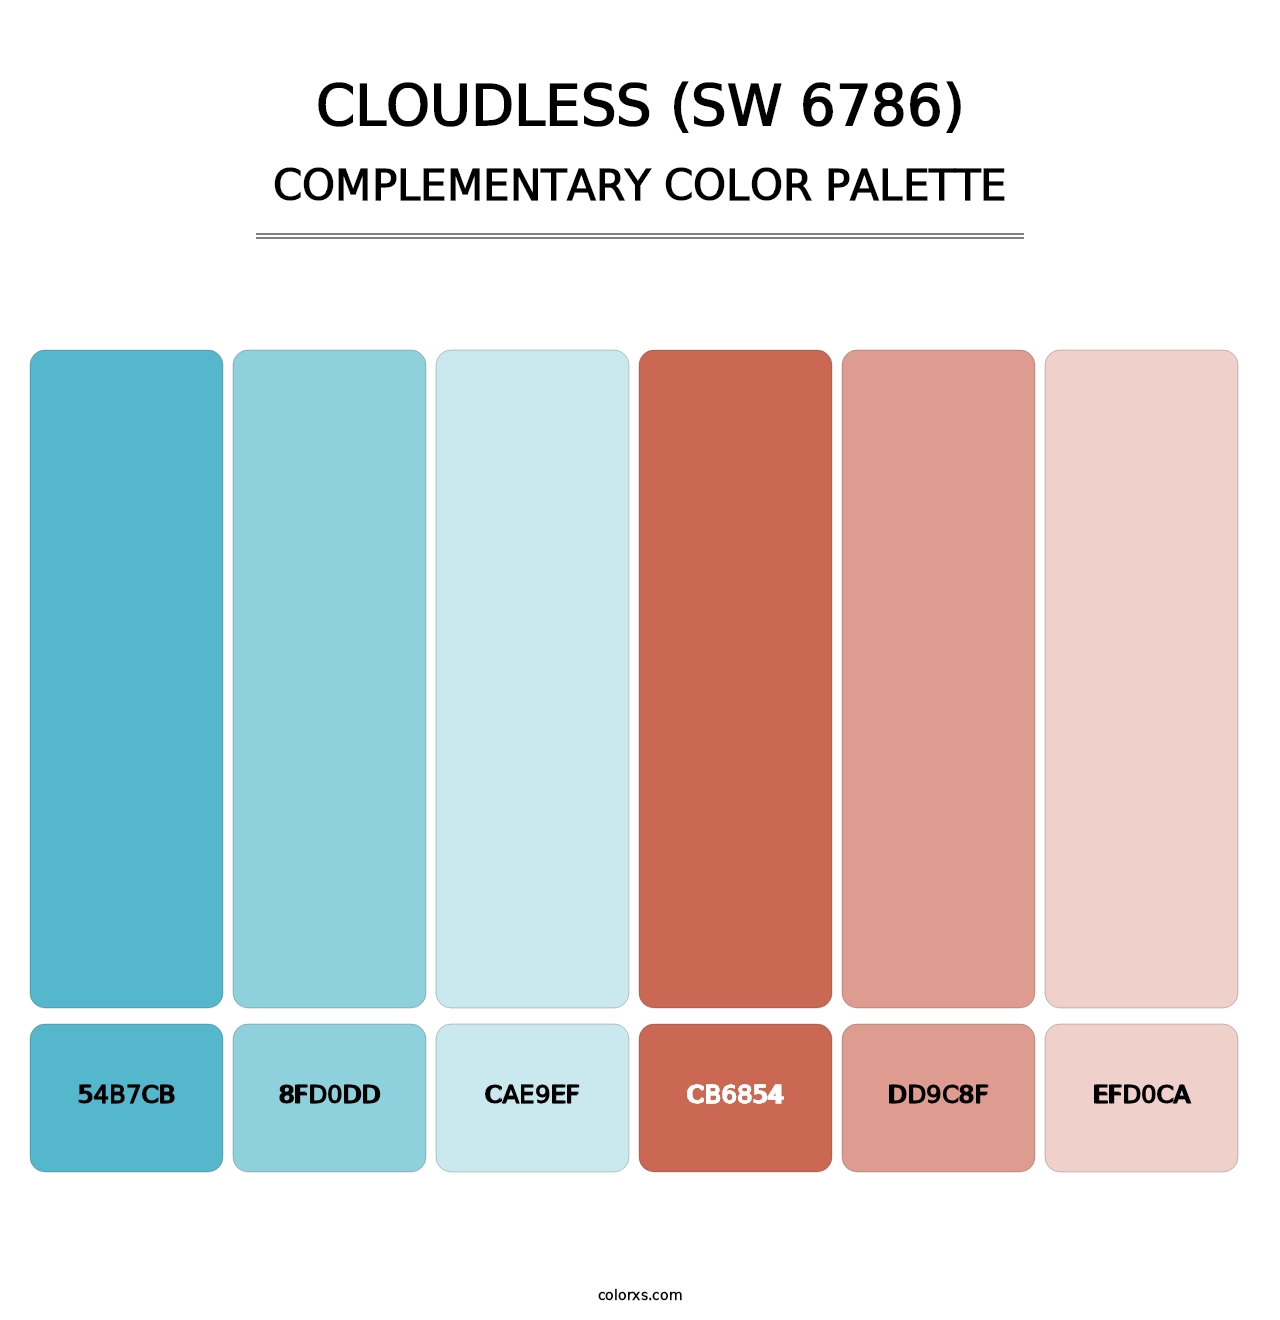 Cloudless (SW 6786) - Complementary Color Palette